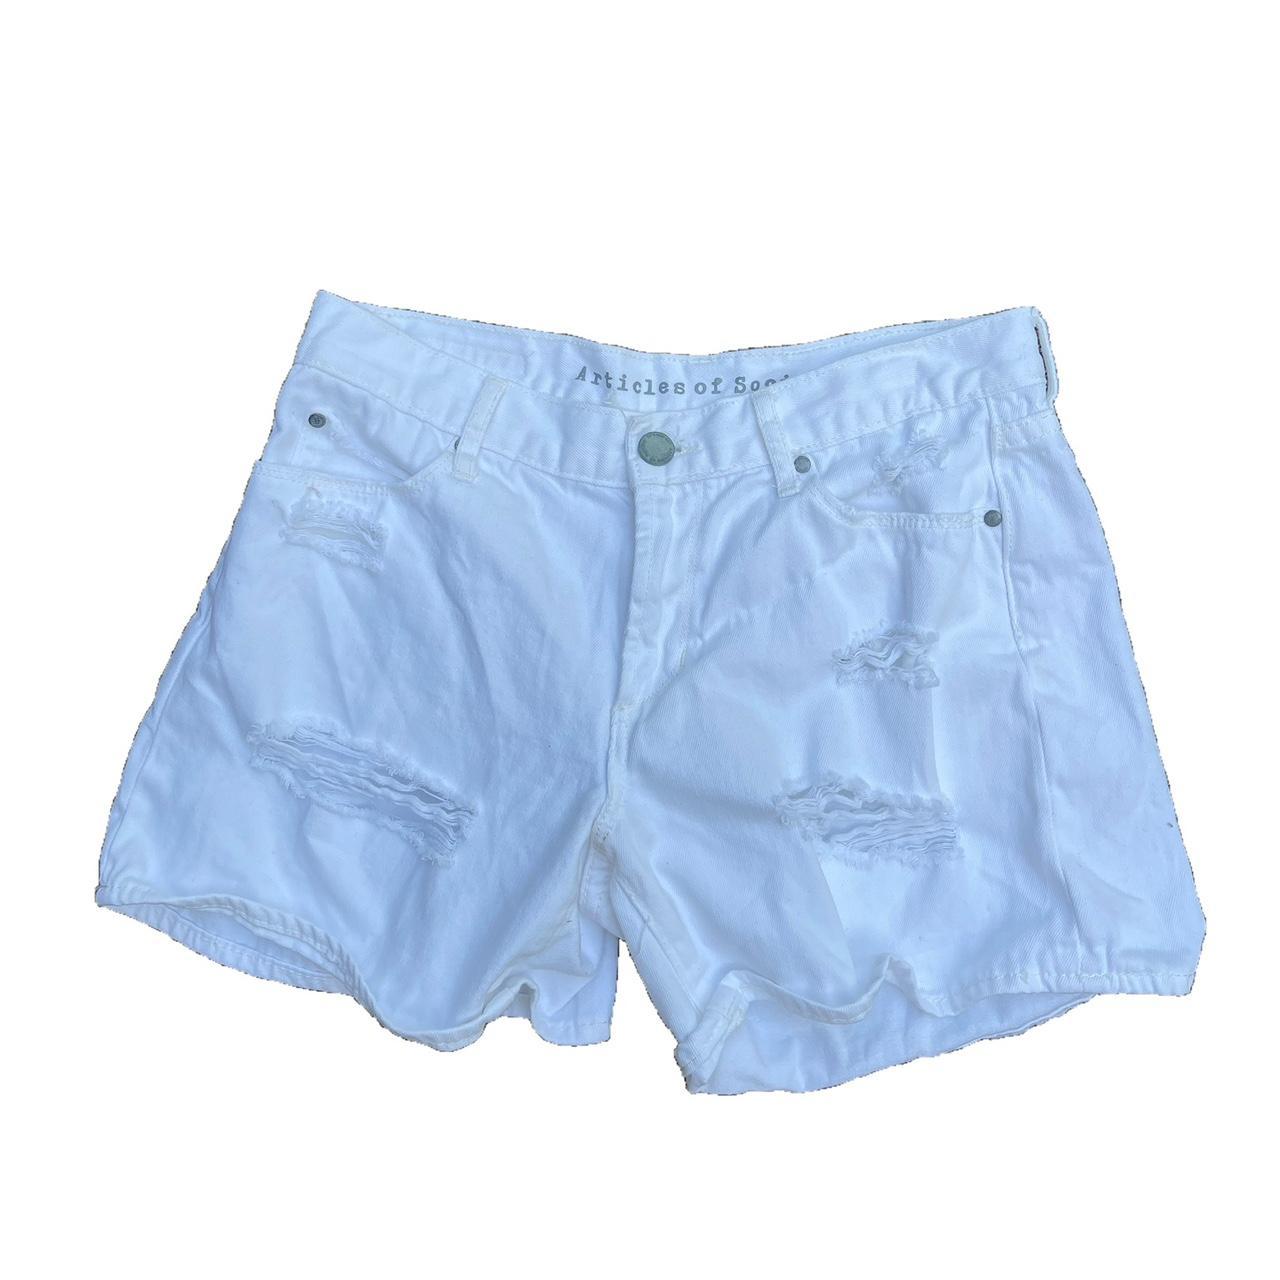 Articles of Society Women's White Shorts